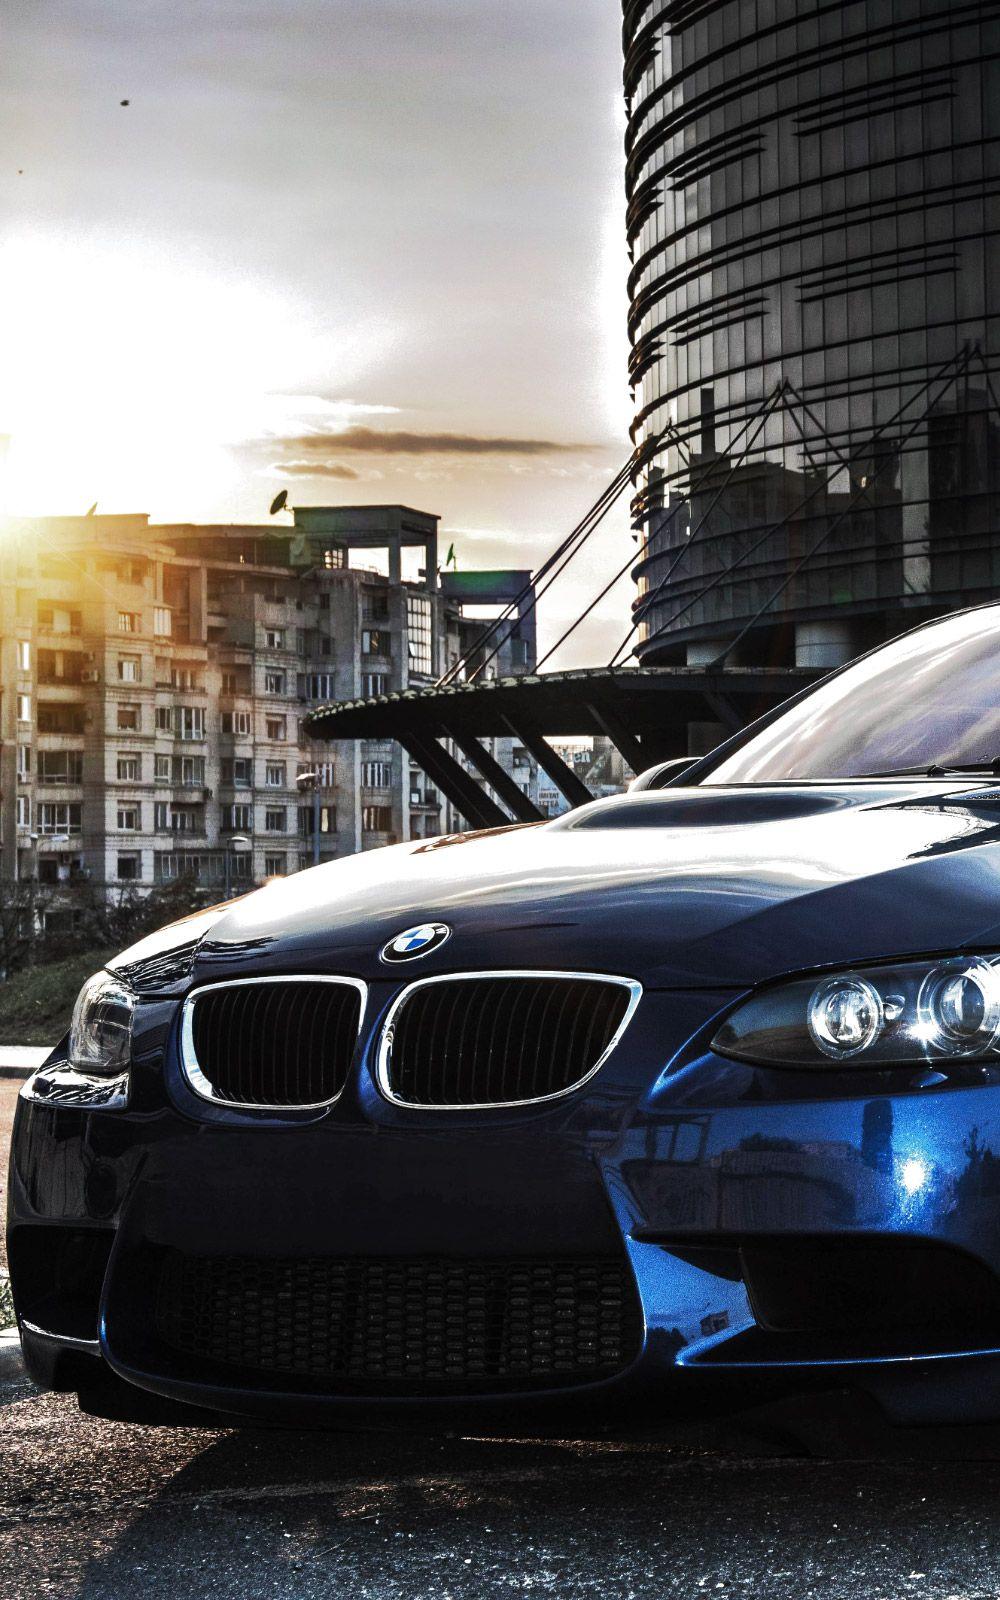 Wallpaper for mobile, Bmw cars and BMW. Bmw, Sports